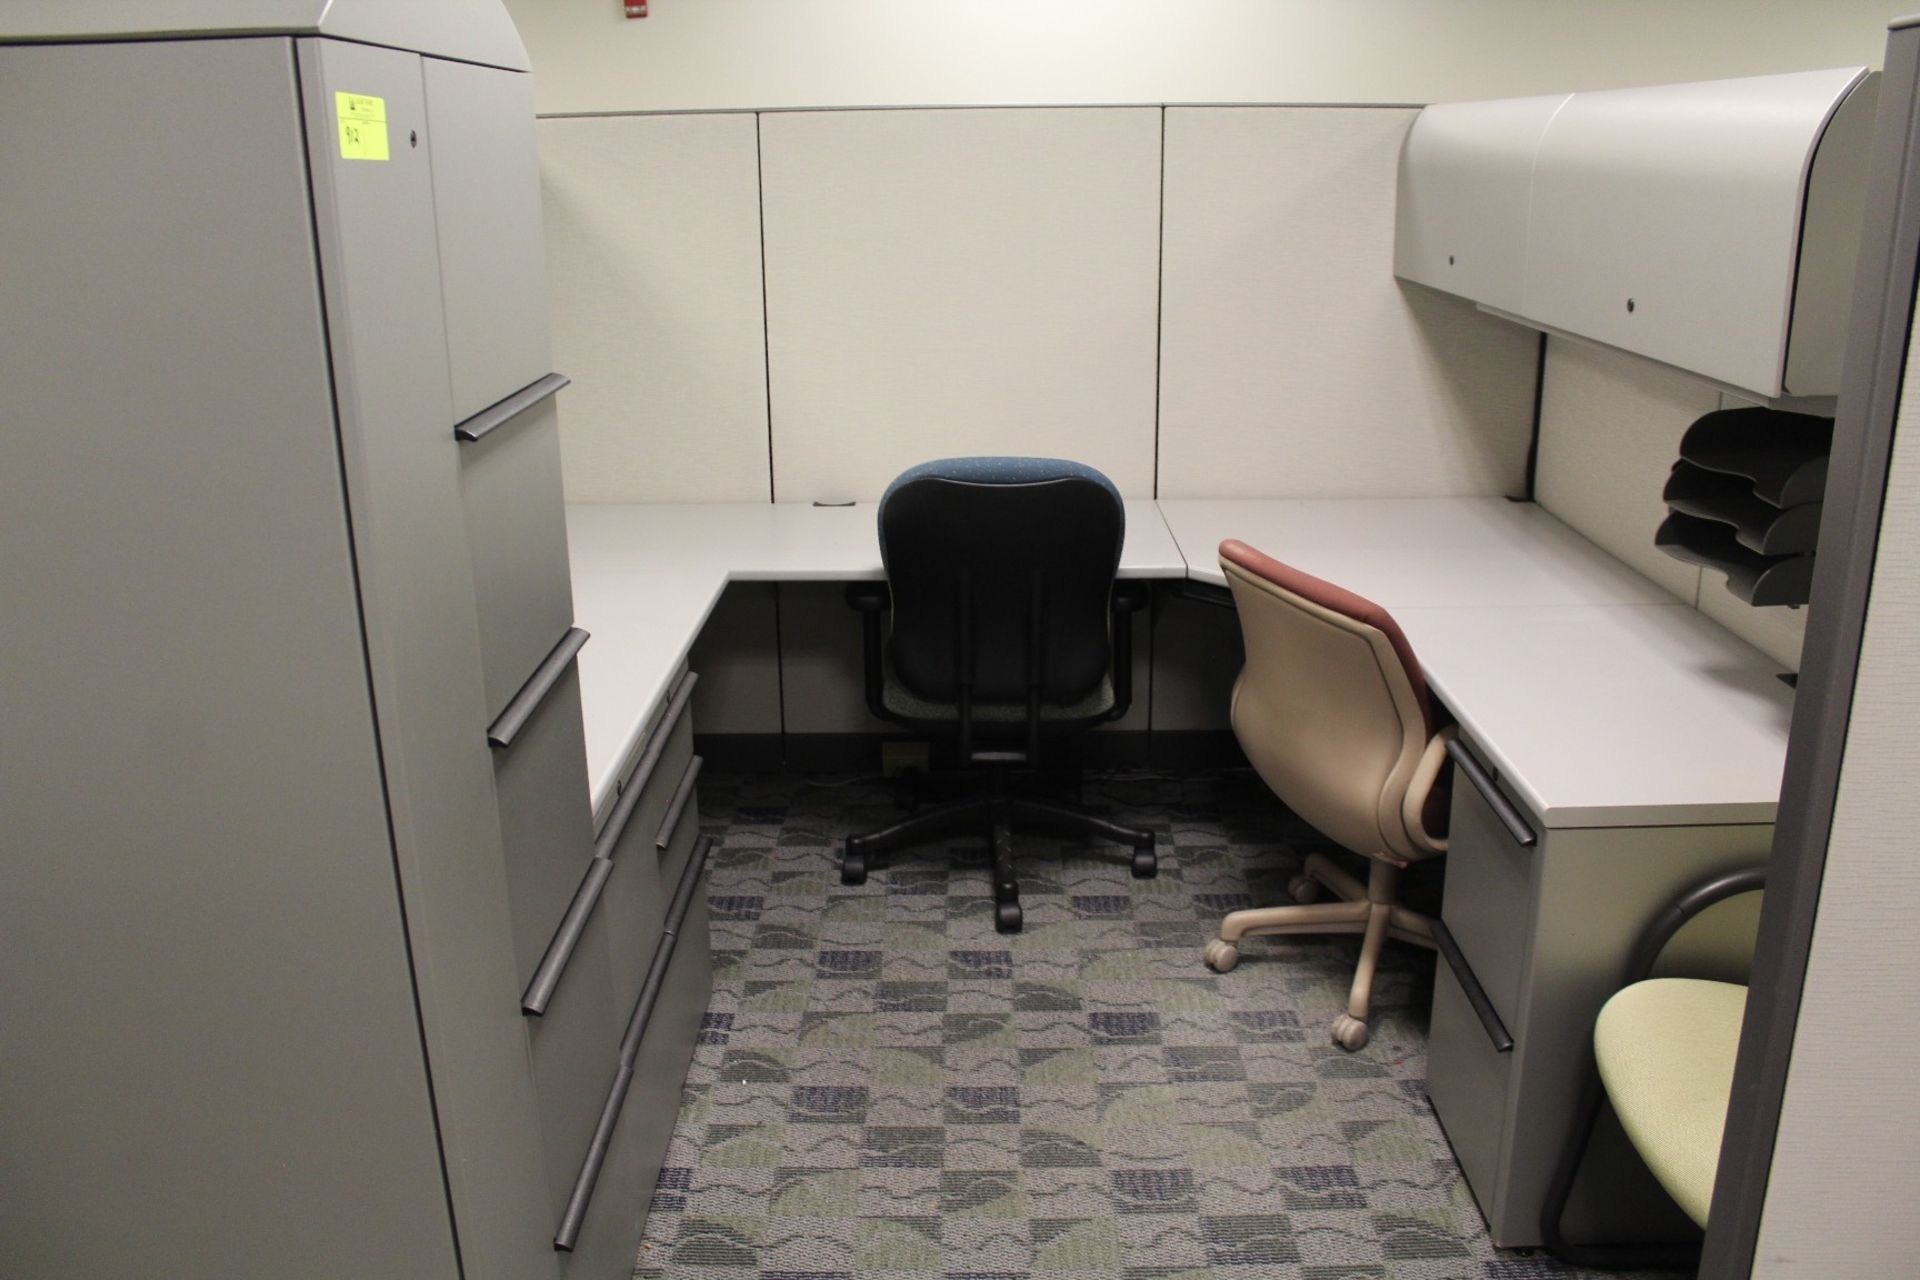 Cubicle Office System, W/ (3) Work Stations, Chairs, File Cabinets, Storage Cabinets & Cubicle Walls - Bild 2 aus 5